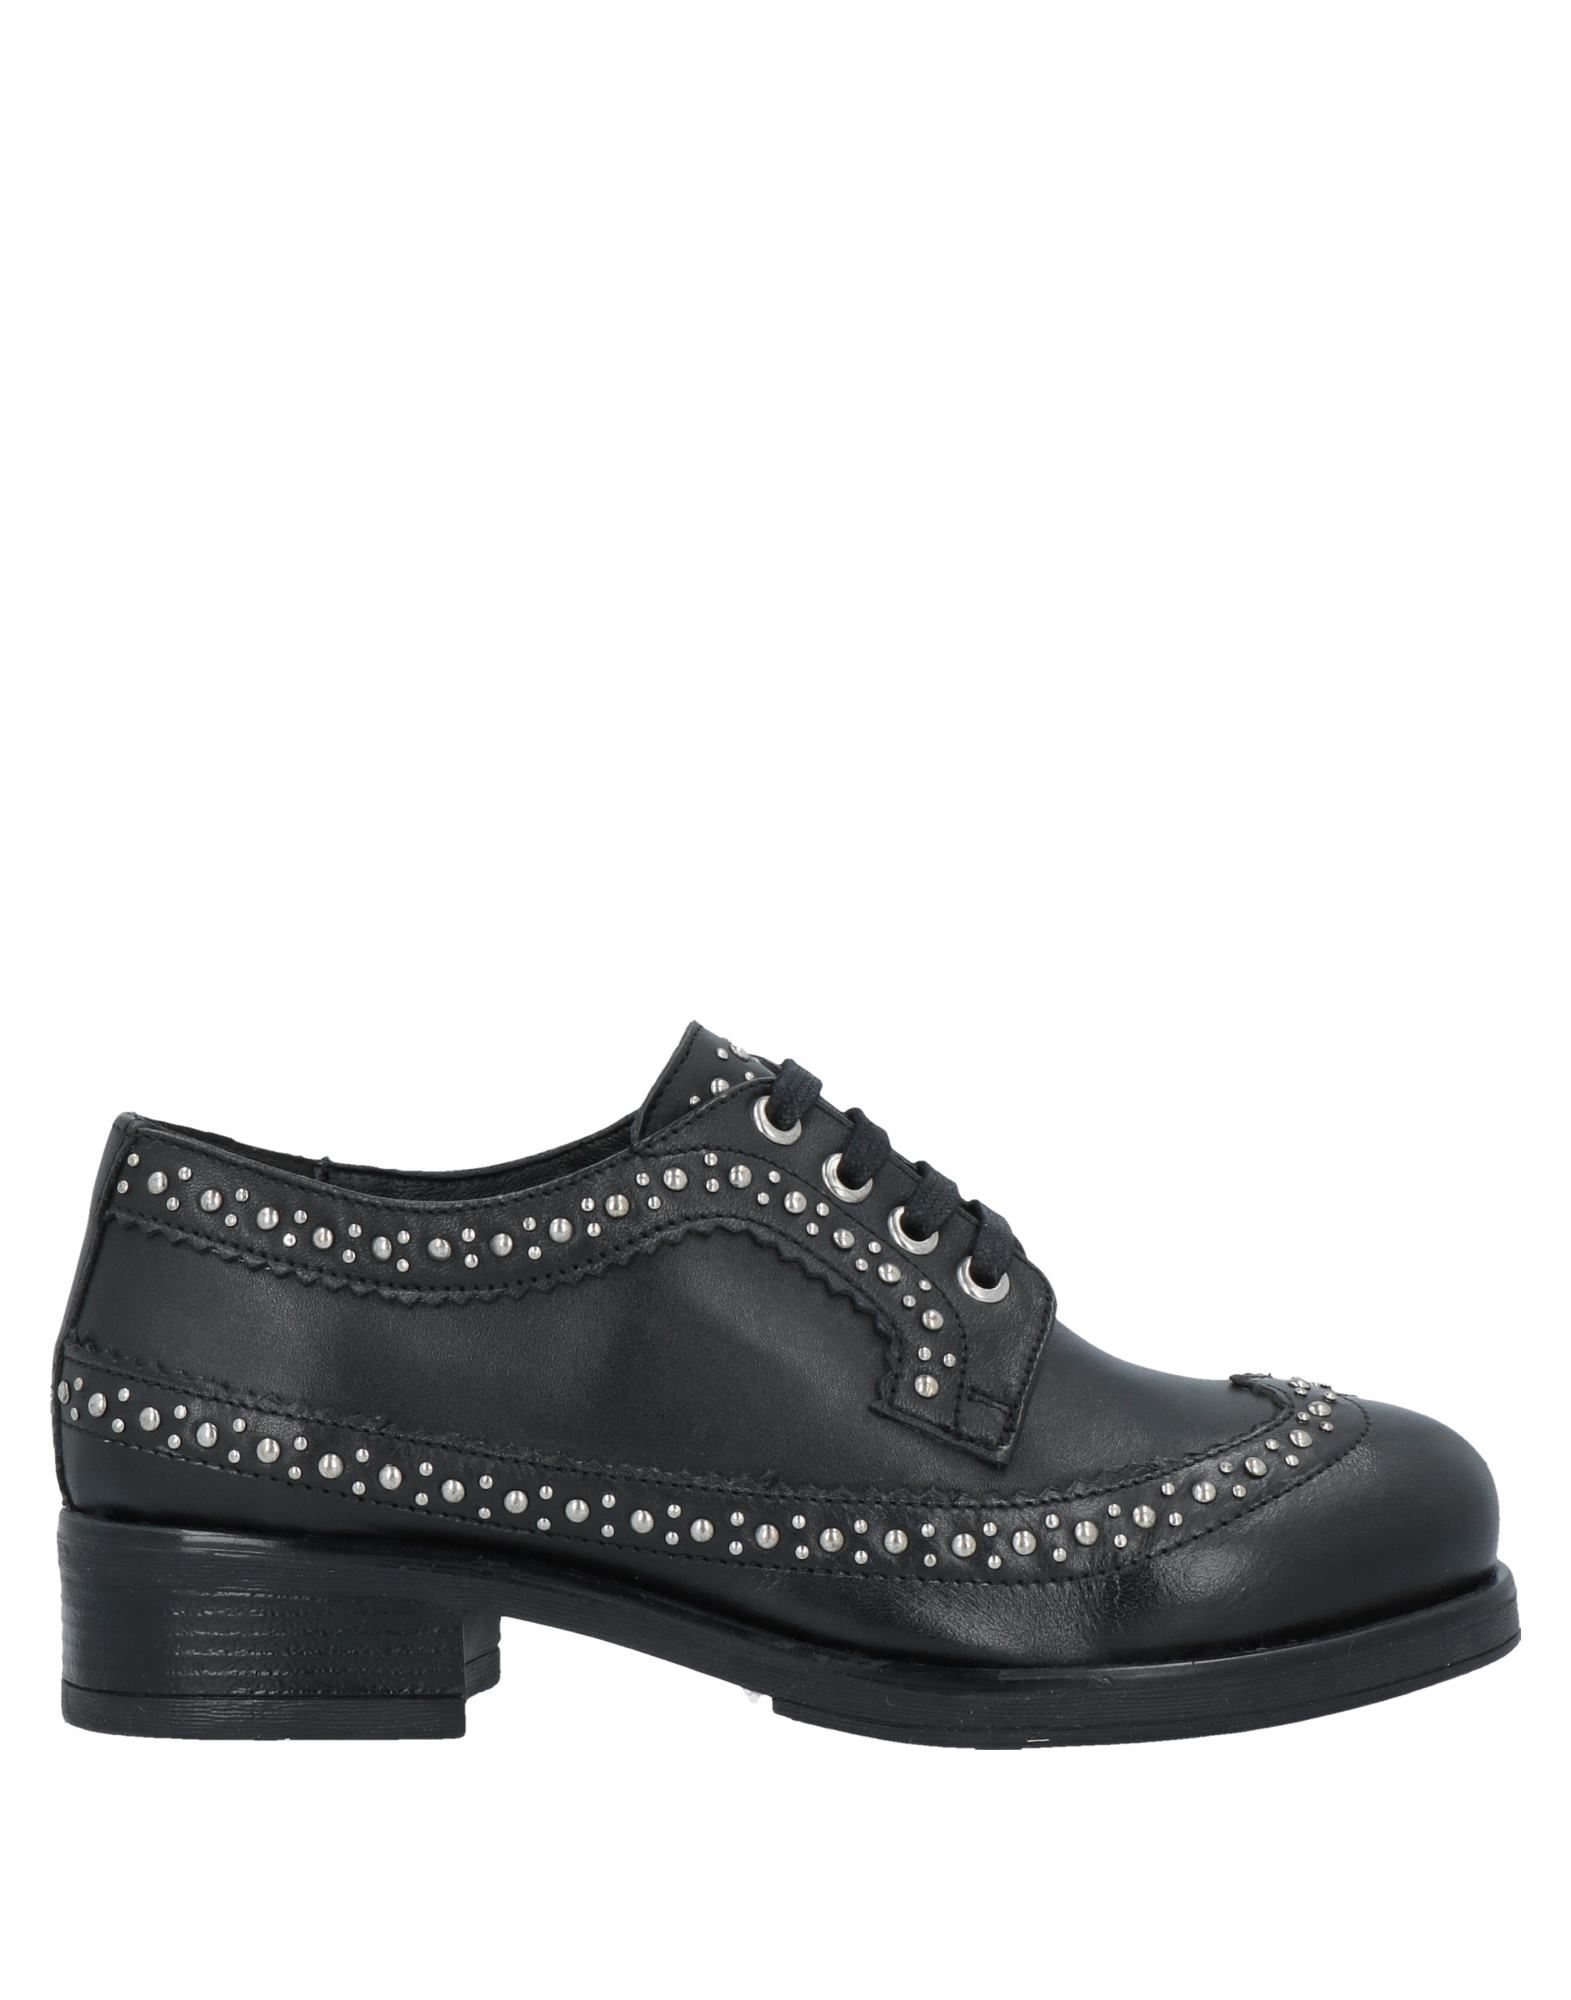 WALK by MELLUSO Lace-up shoes